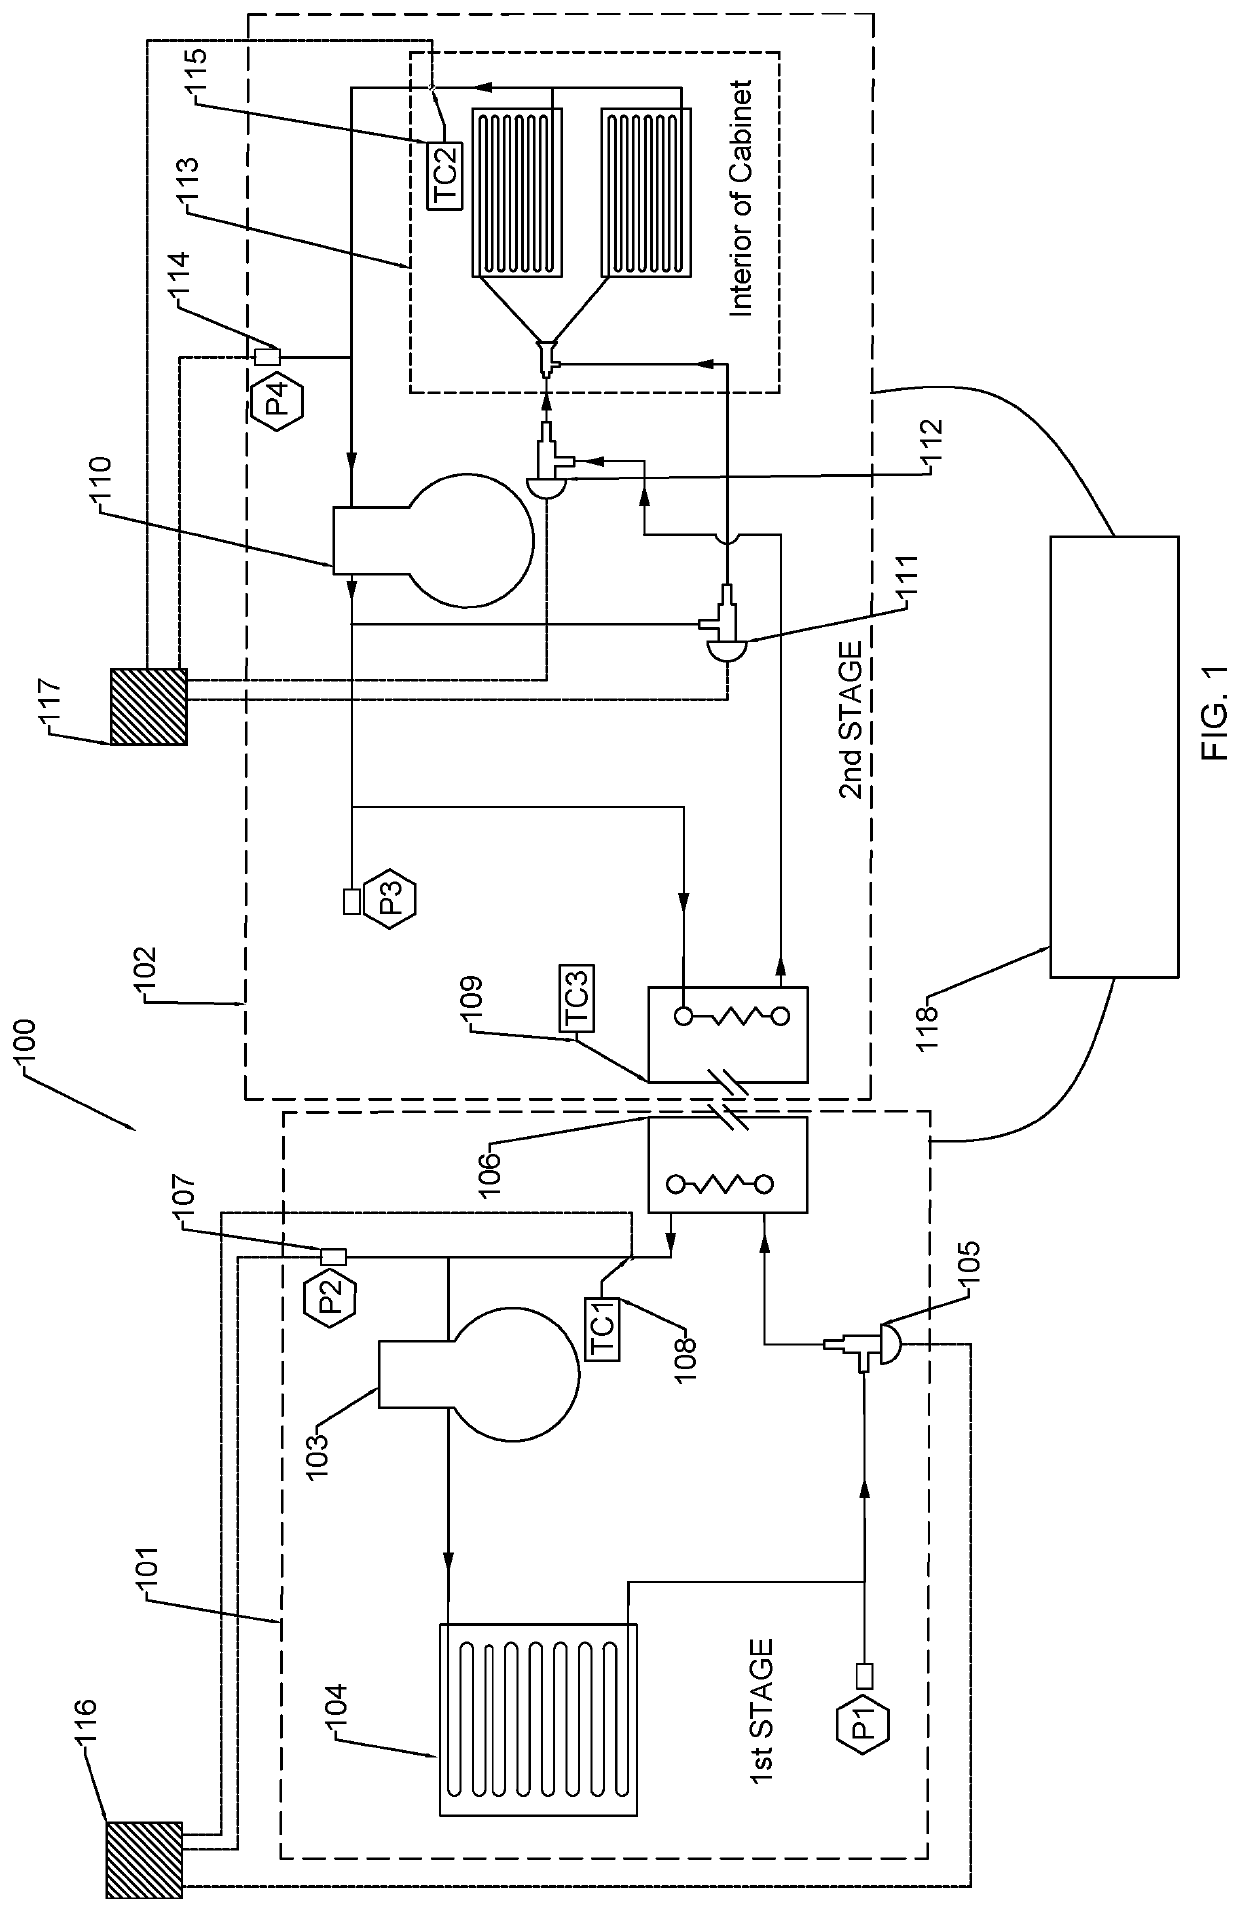 System and Method  of Hot Gas Defrost Control for Multistage Cascade Refrigeration System